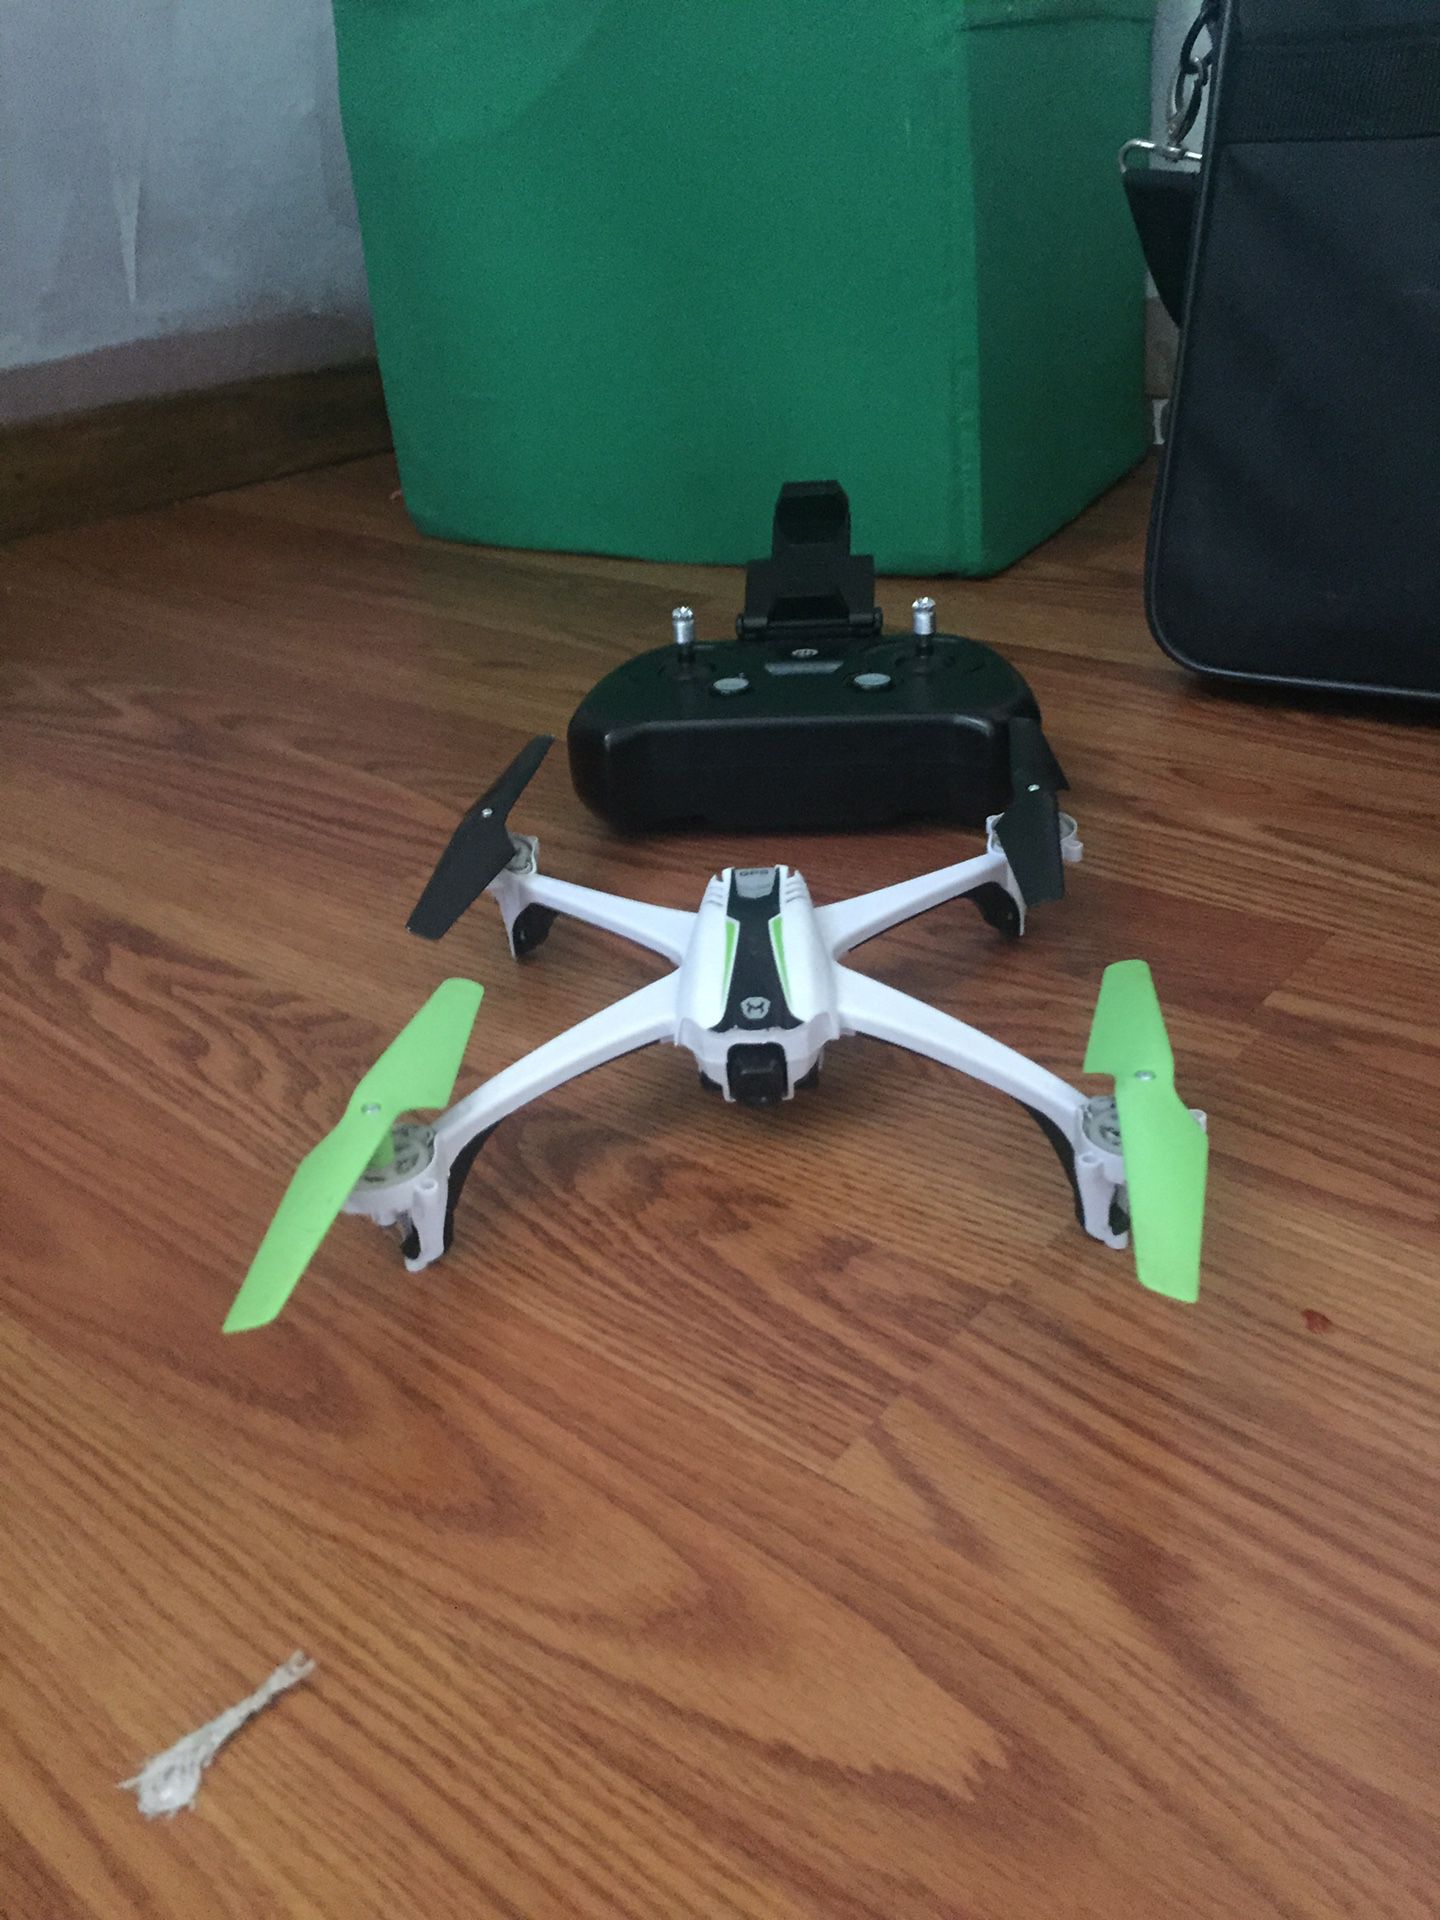 Super cool drone comes with VR set brawn new need money